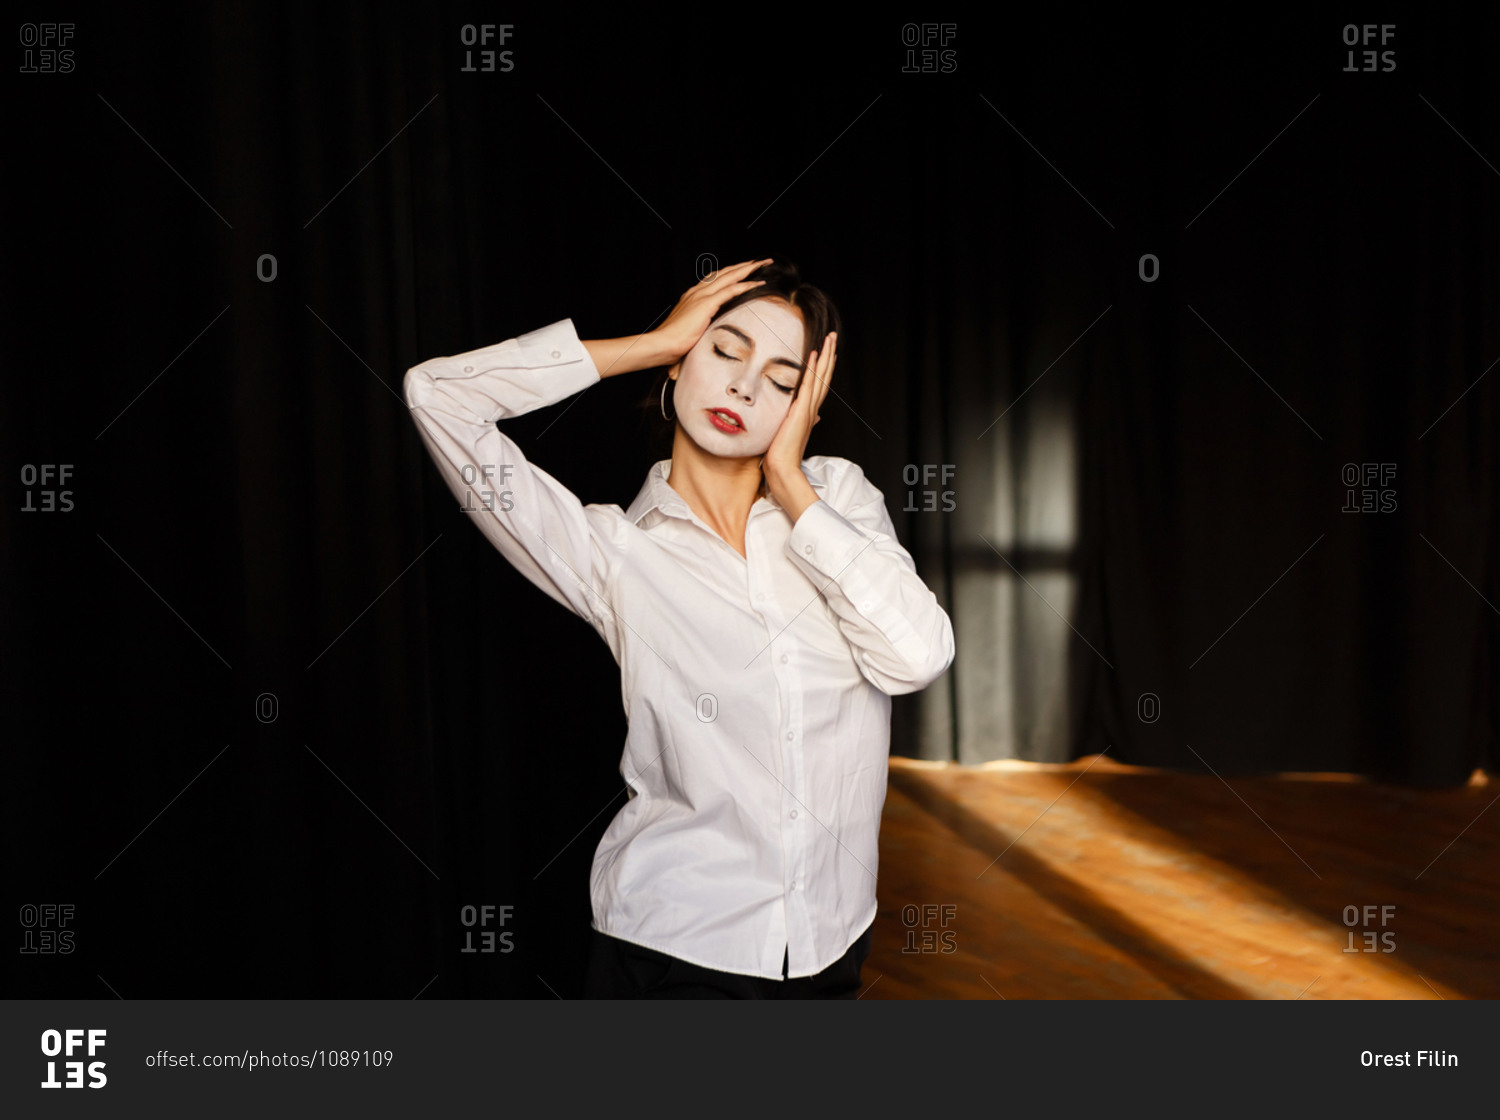 A portrait of an actress woman in a shirt and with done theatrical makeup who is posing like a meme